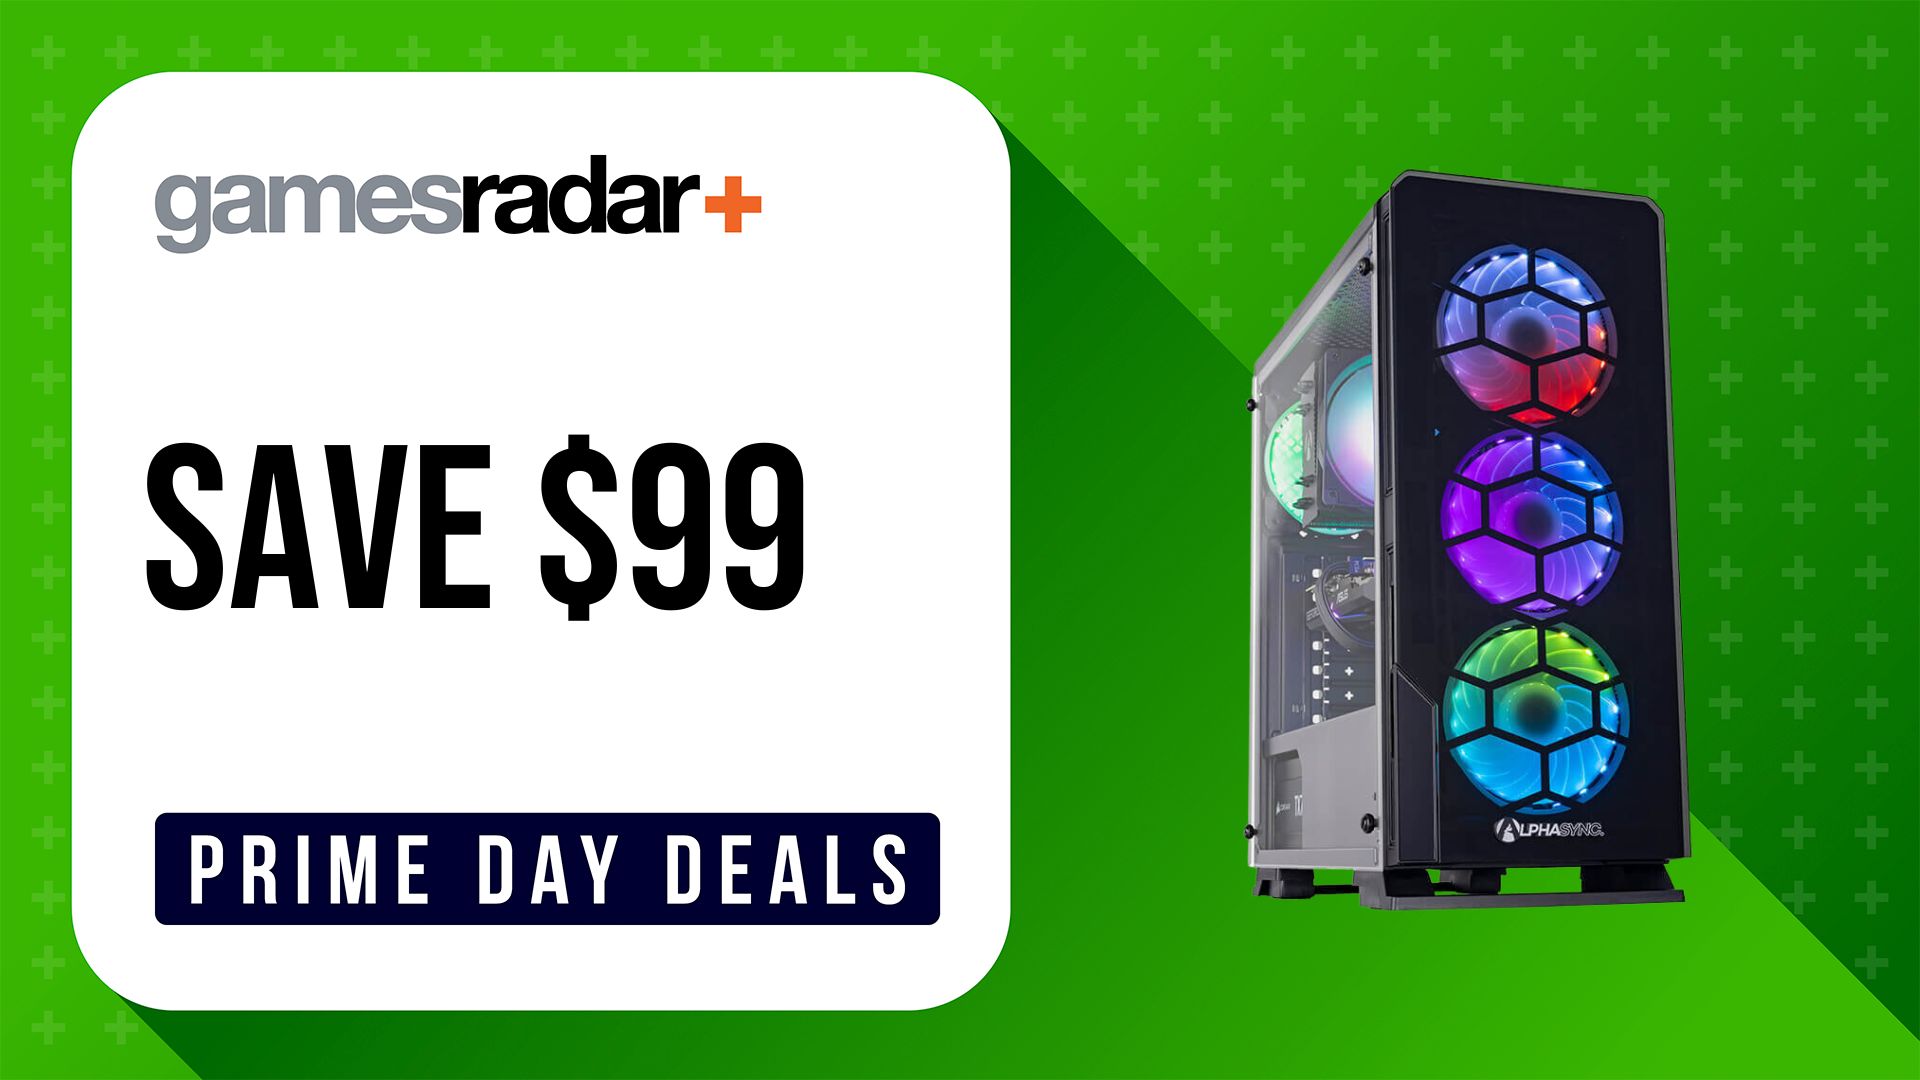 AlphaSync PBA Diamond Prime Day gaming PC deal at eBuyer with green background